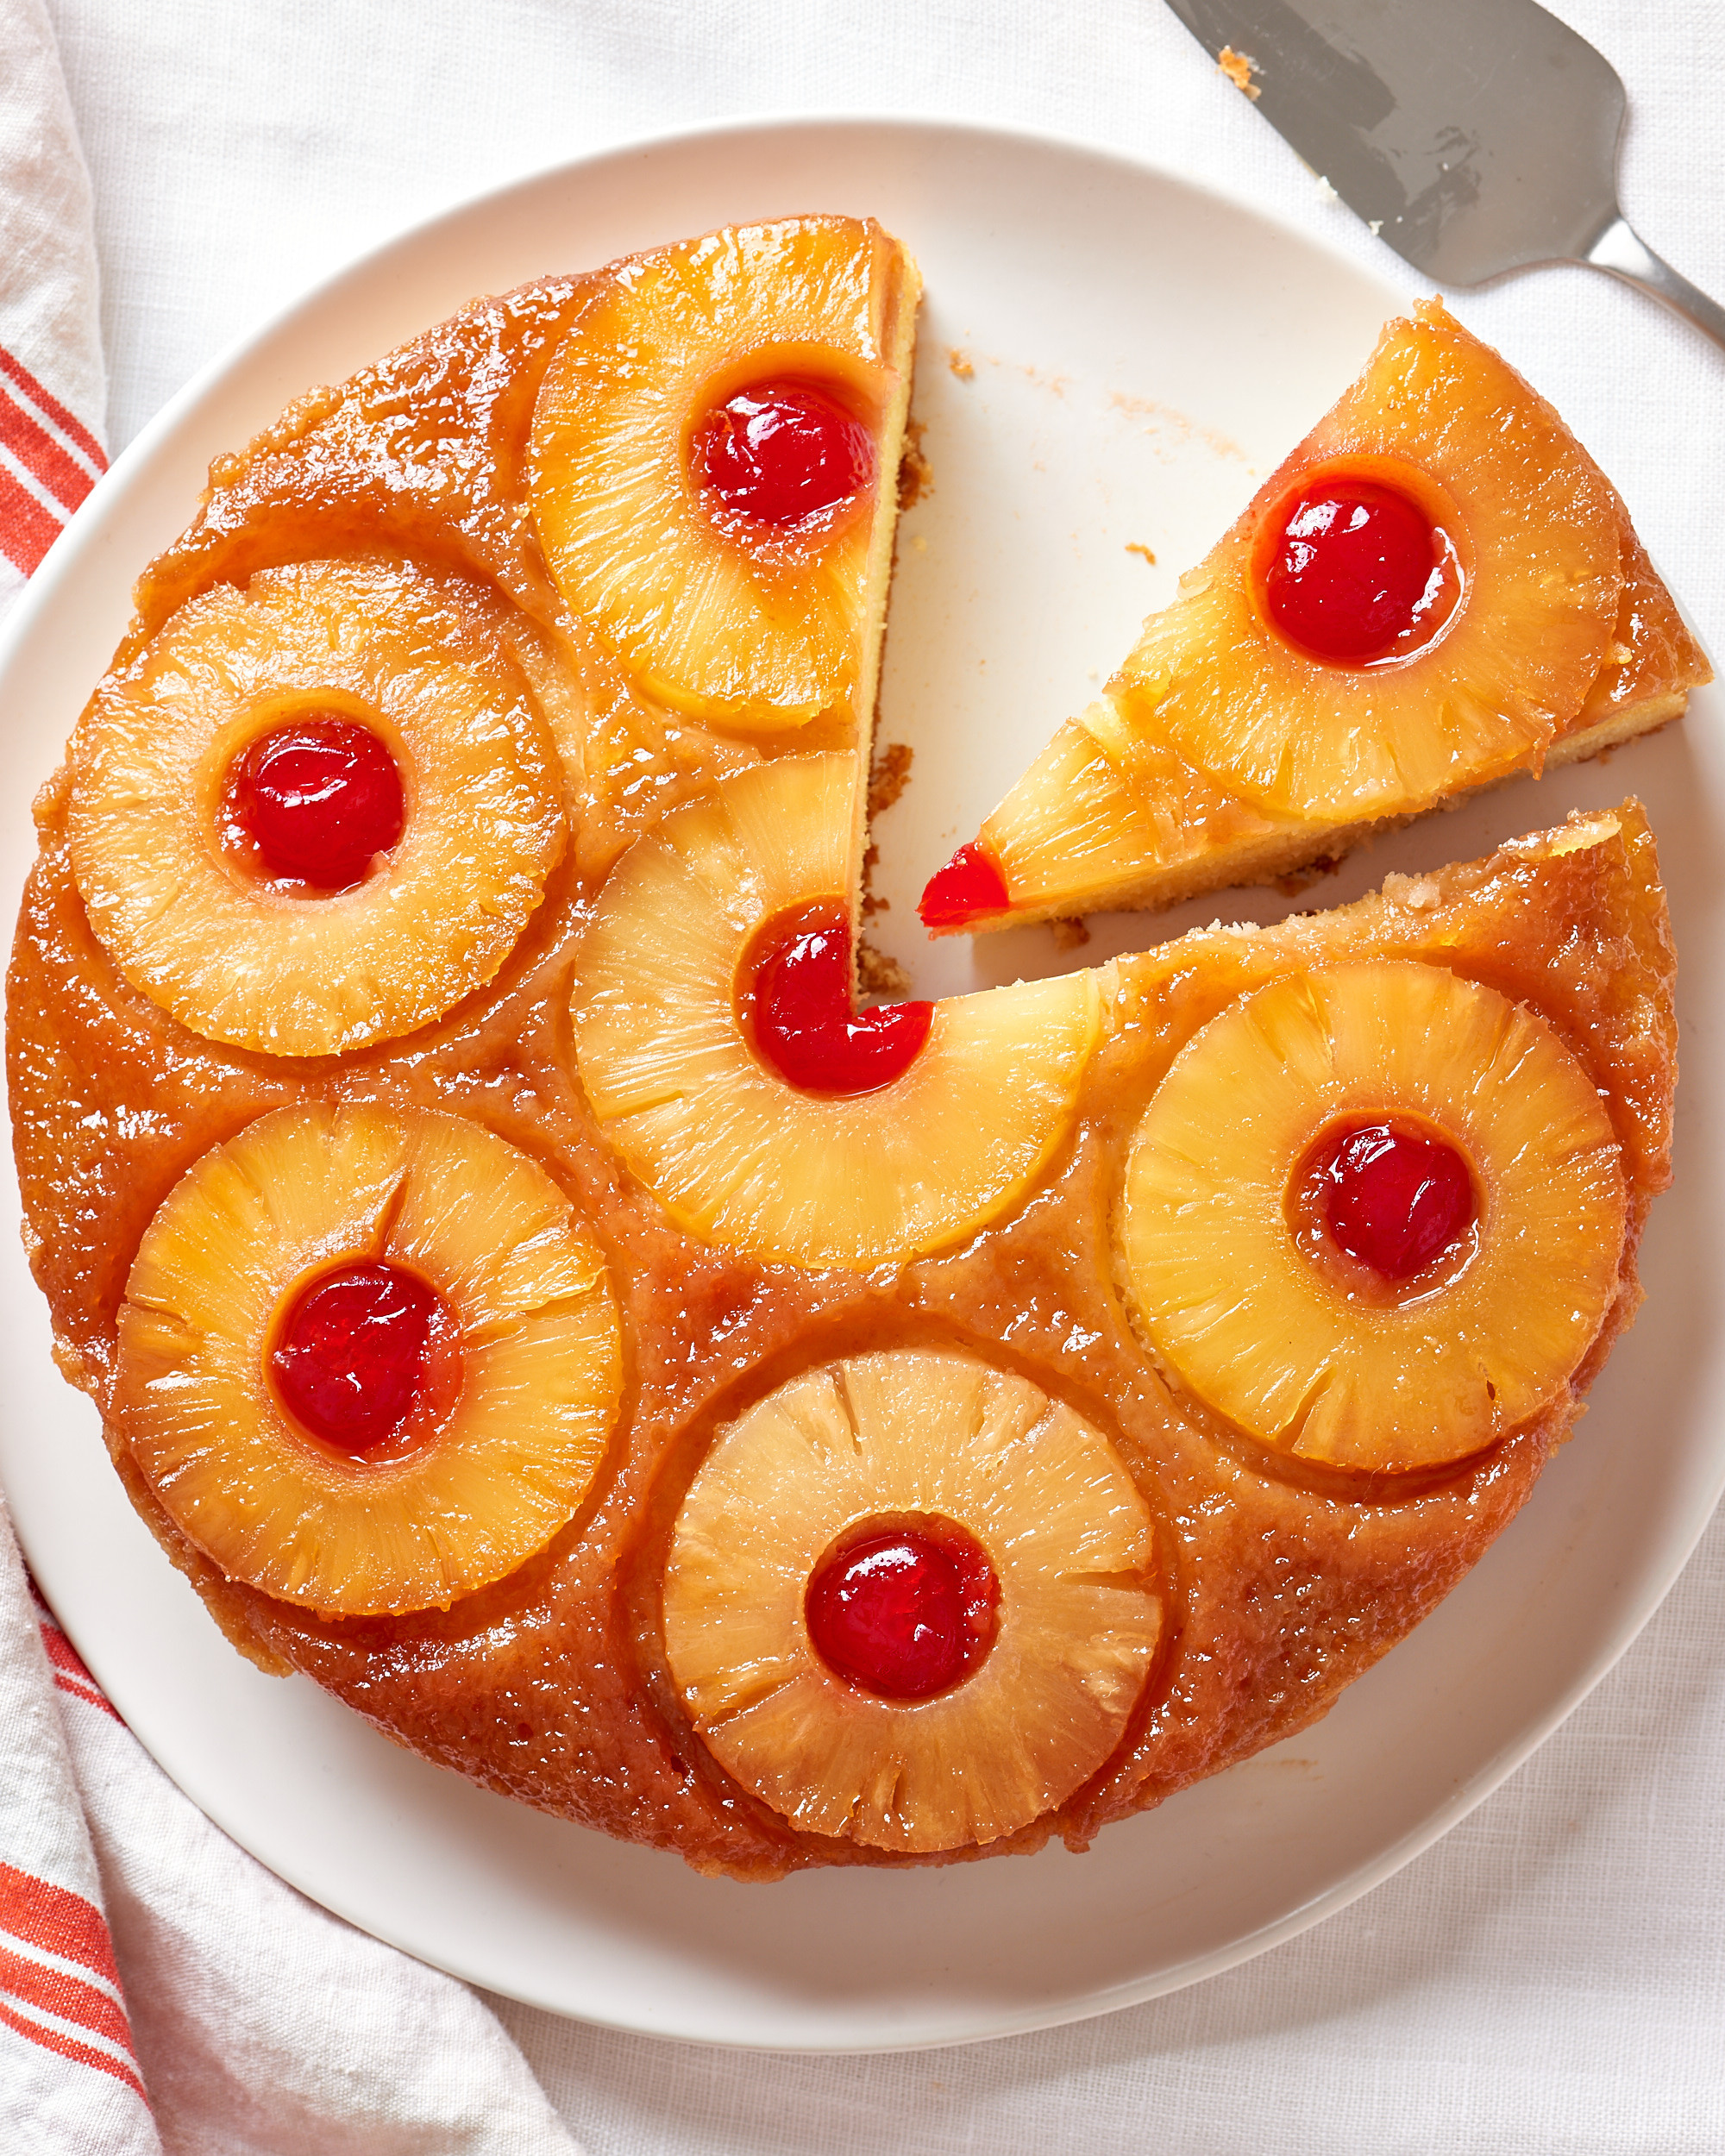 Southern Pineapple Upside Down Cake
 Southern Pineapple Upside Down Cake From Scratch